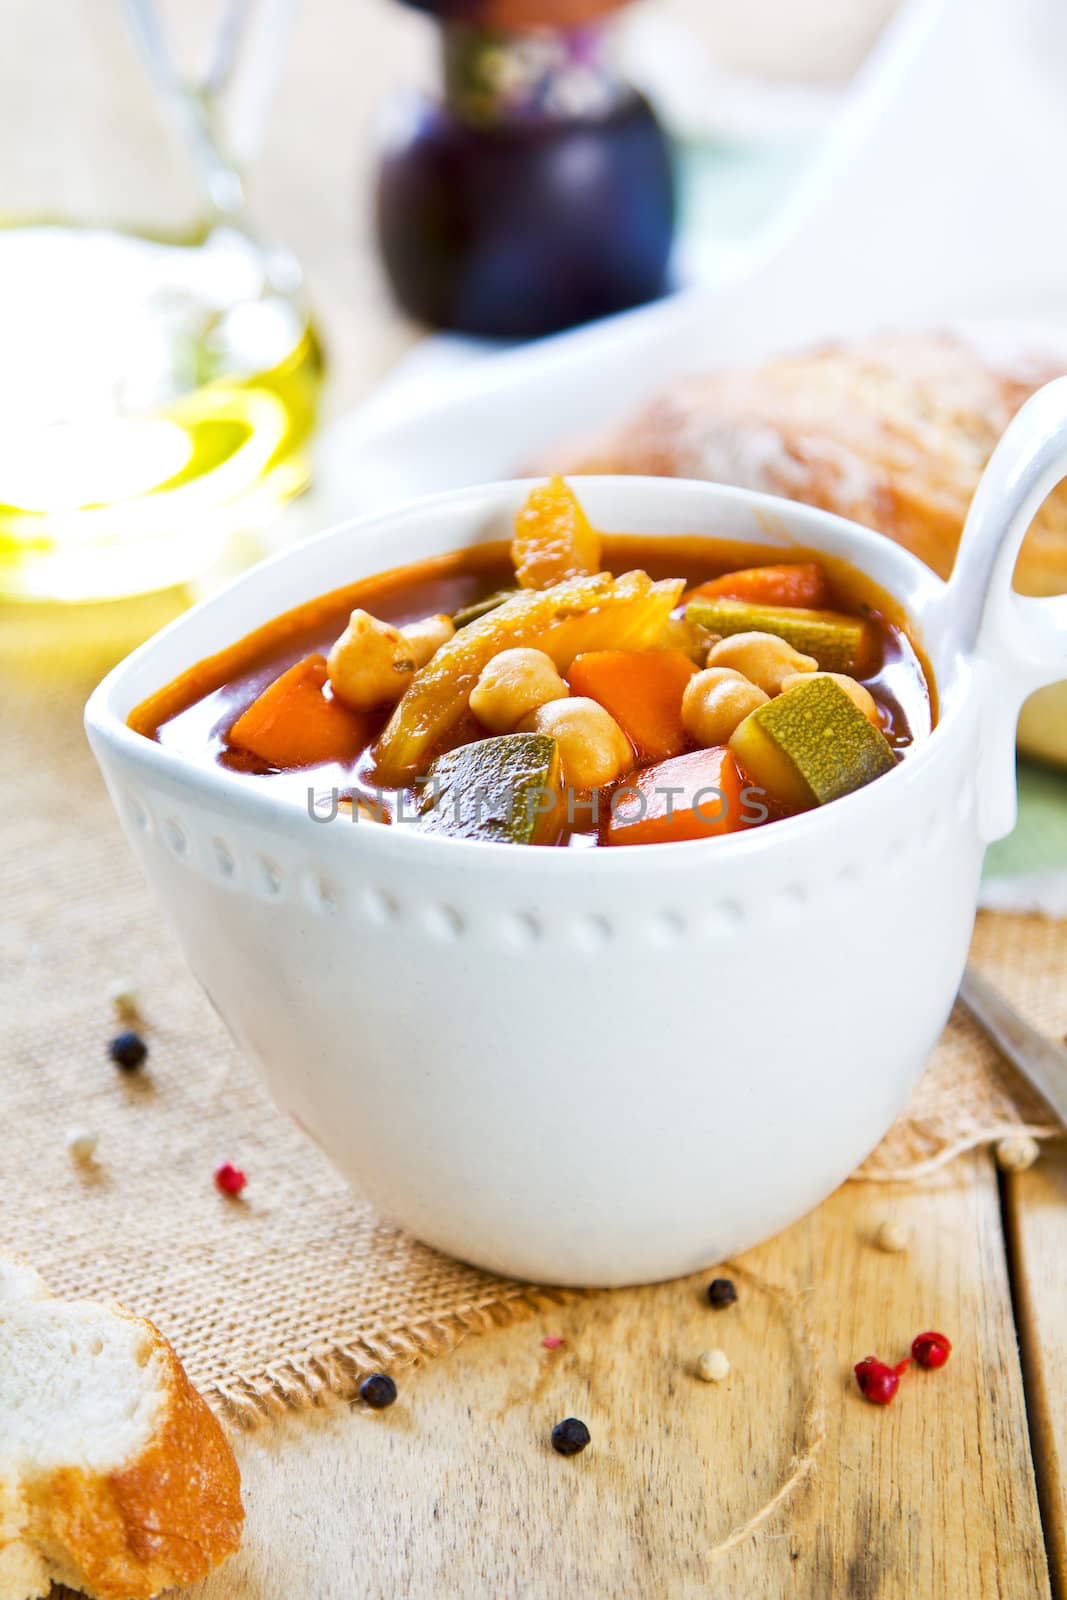 Vegetables with Chickpea soup by vanillaechoes